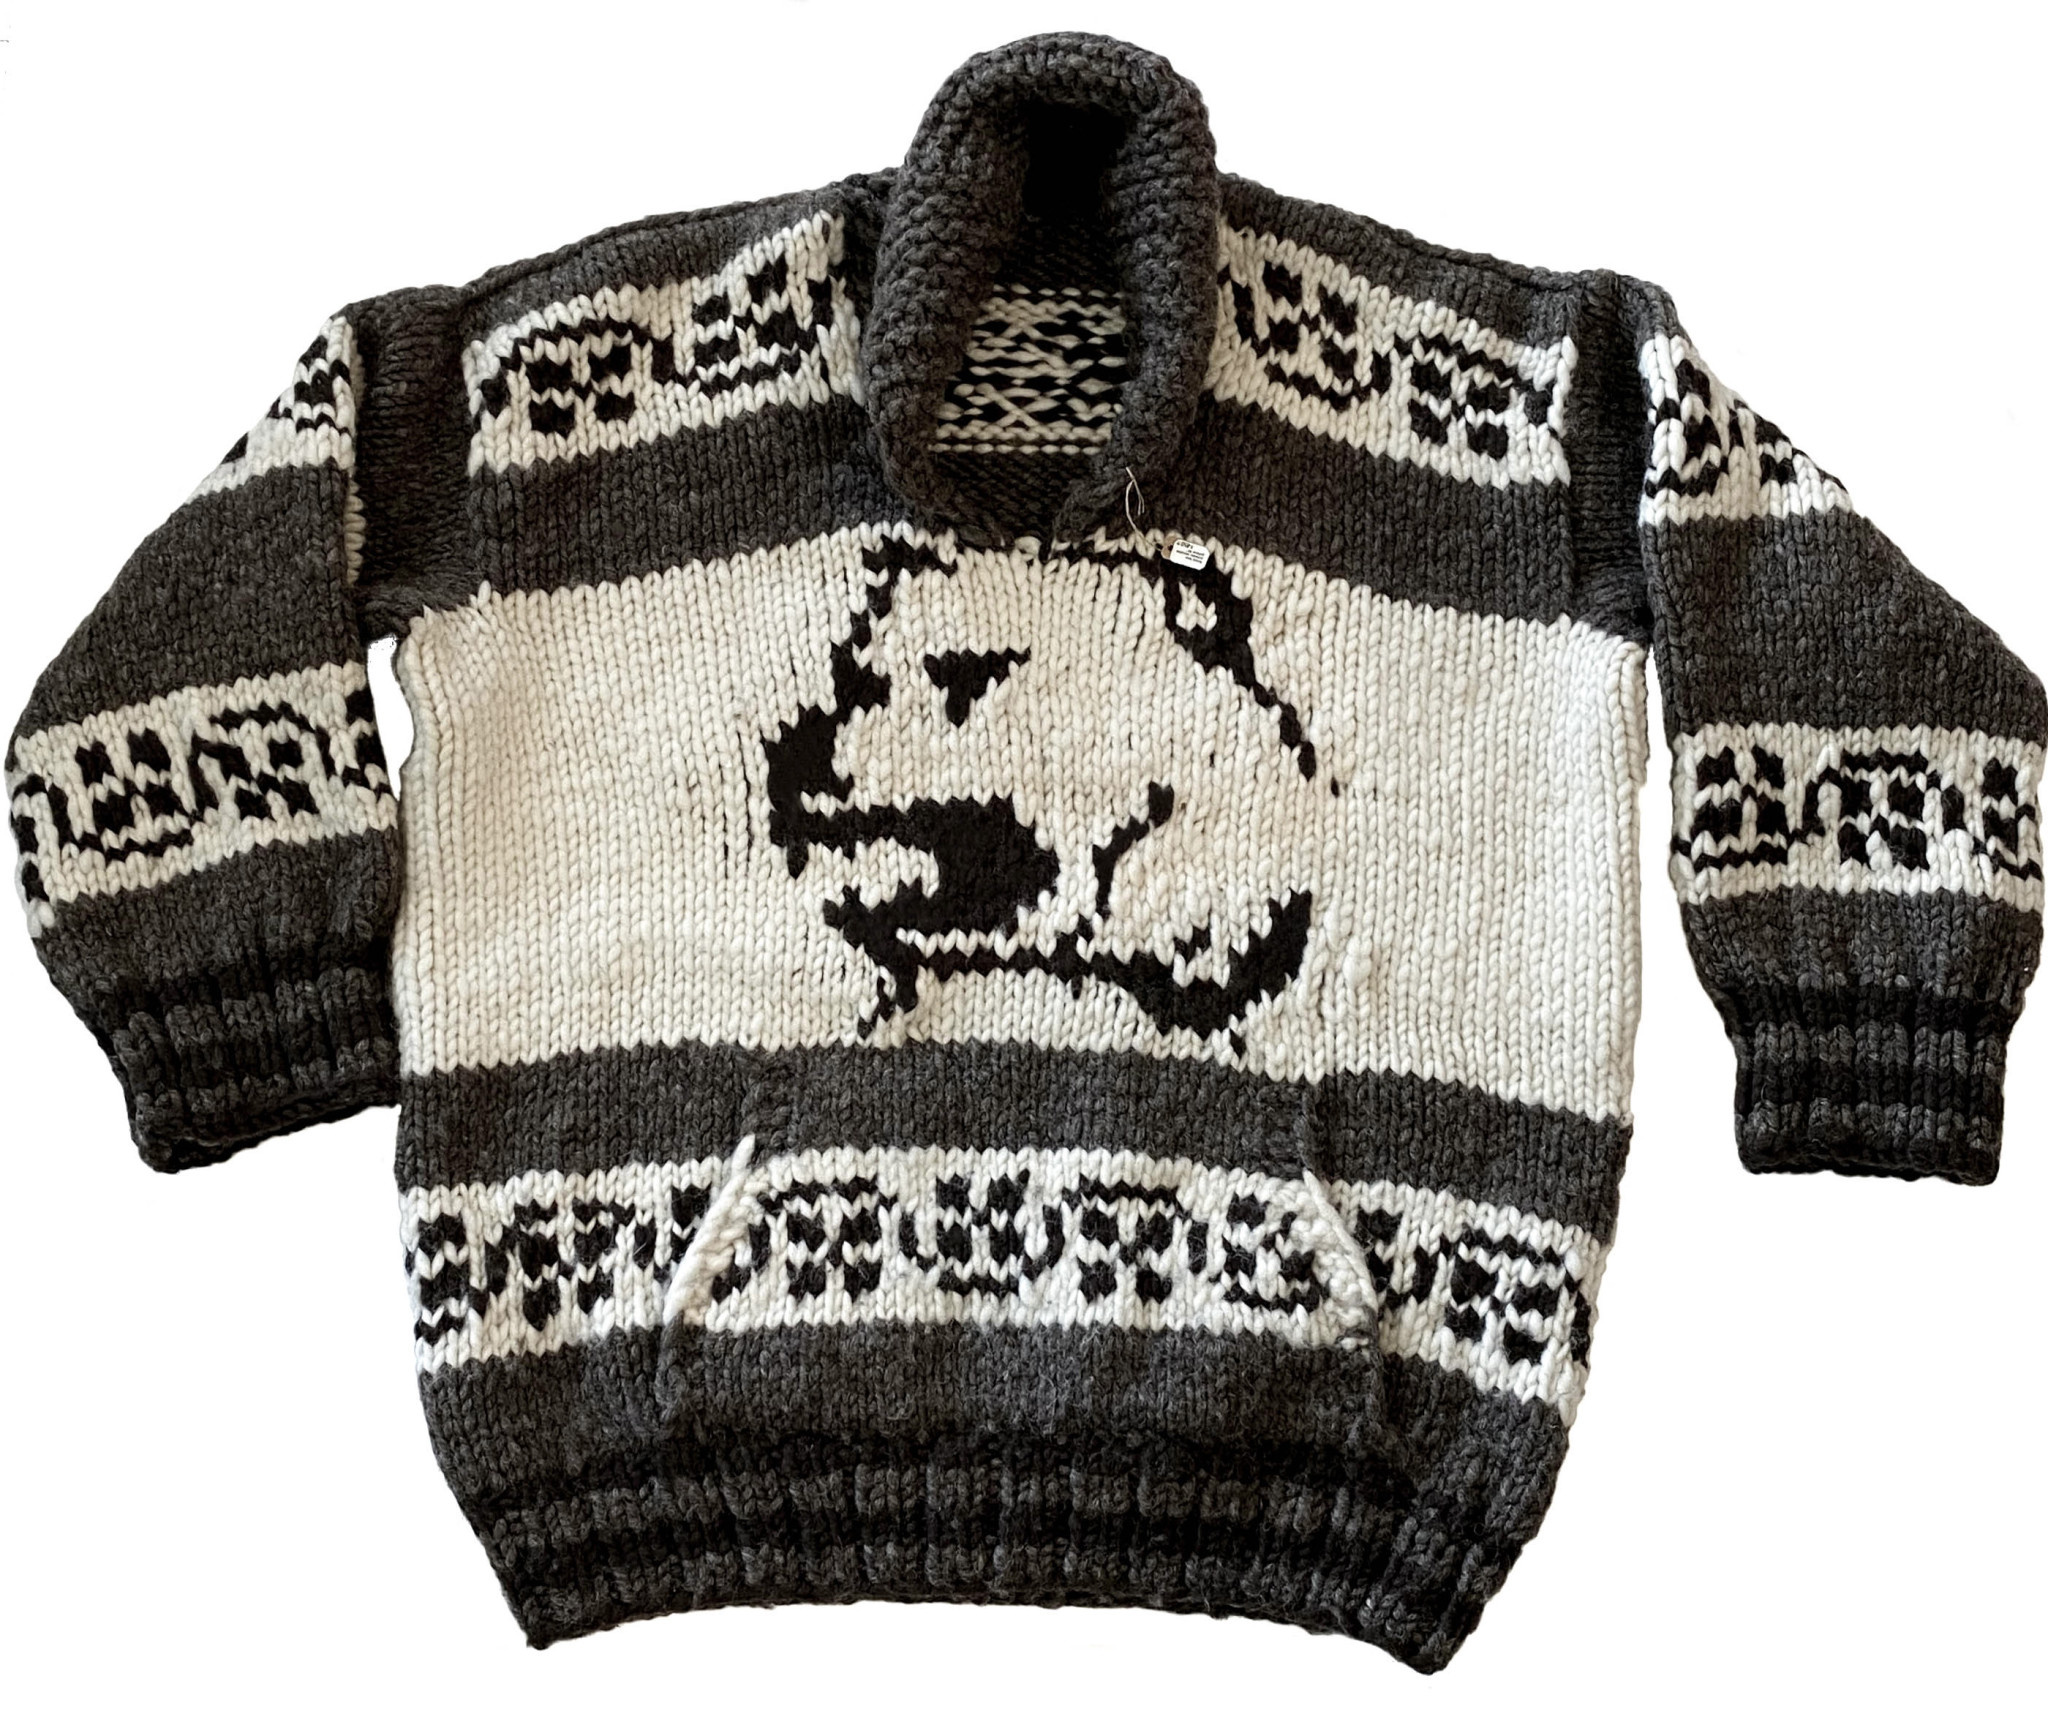 XXXL Grizzly Bear Protector Pullover Cowichan Sweater